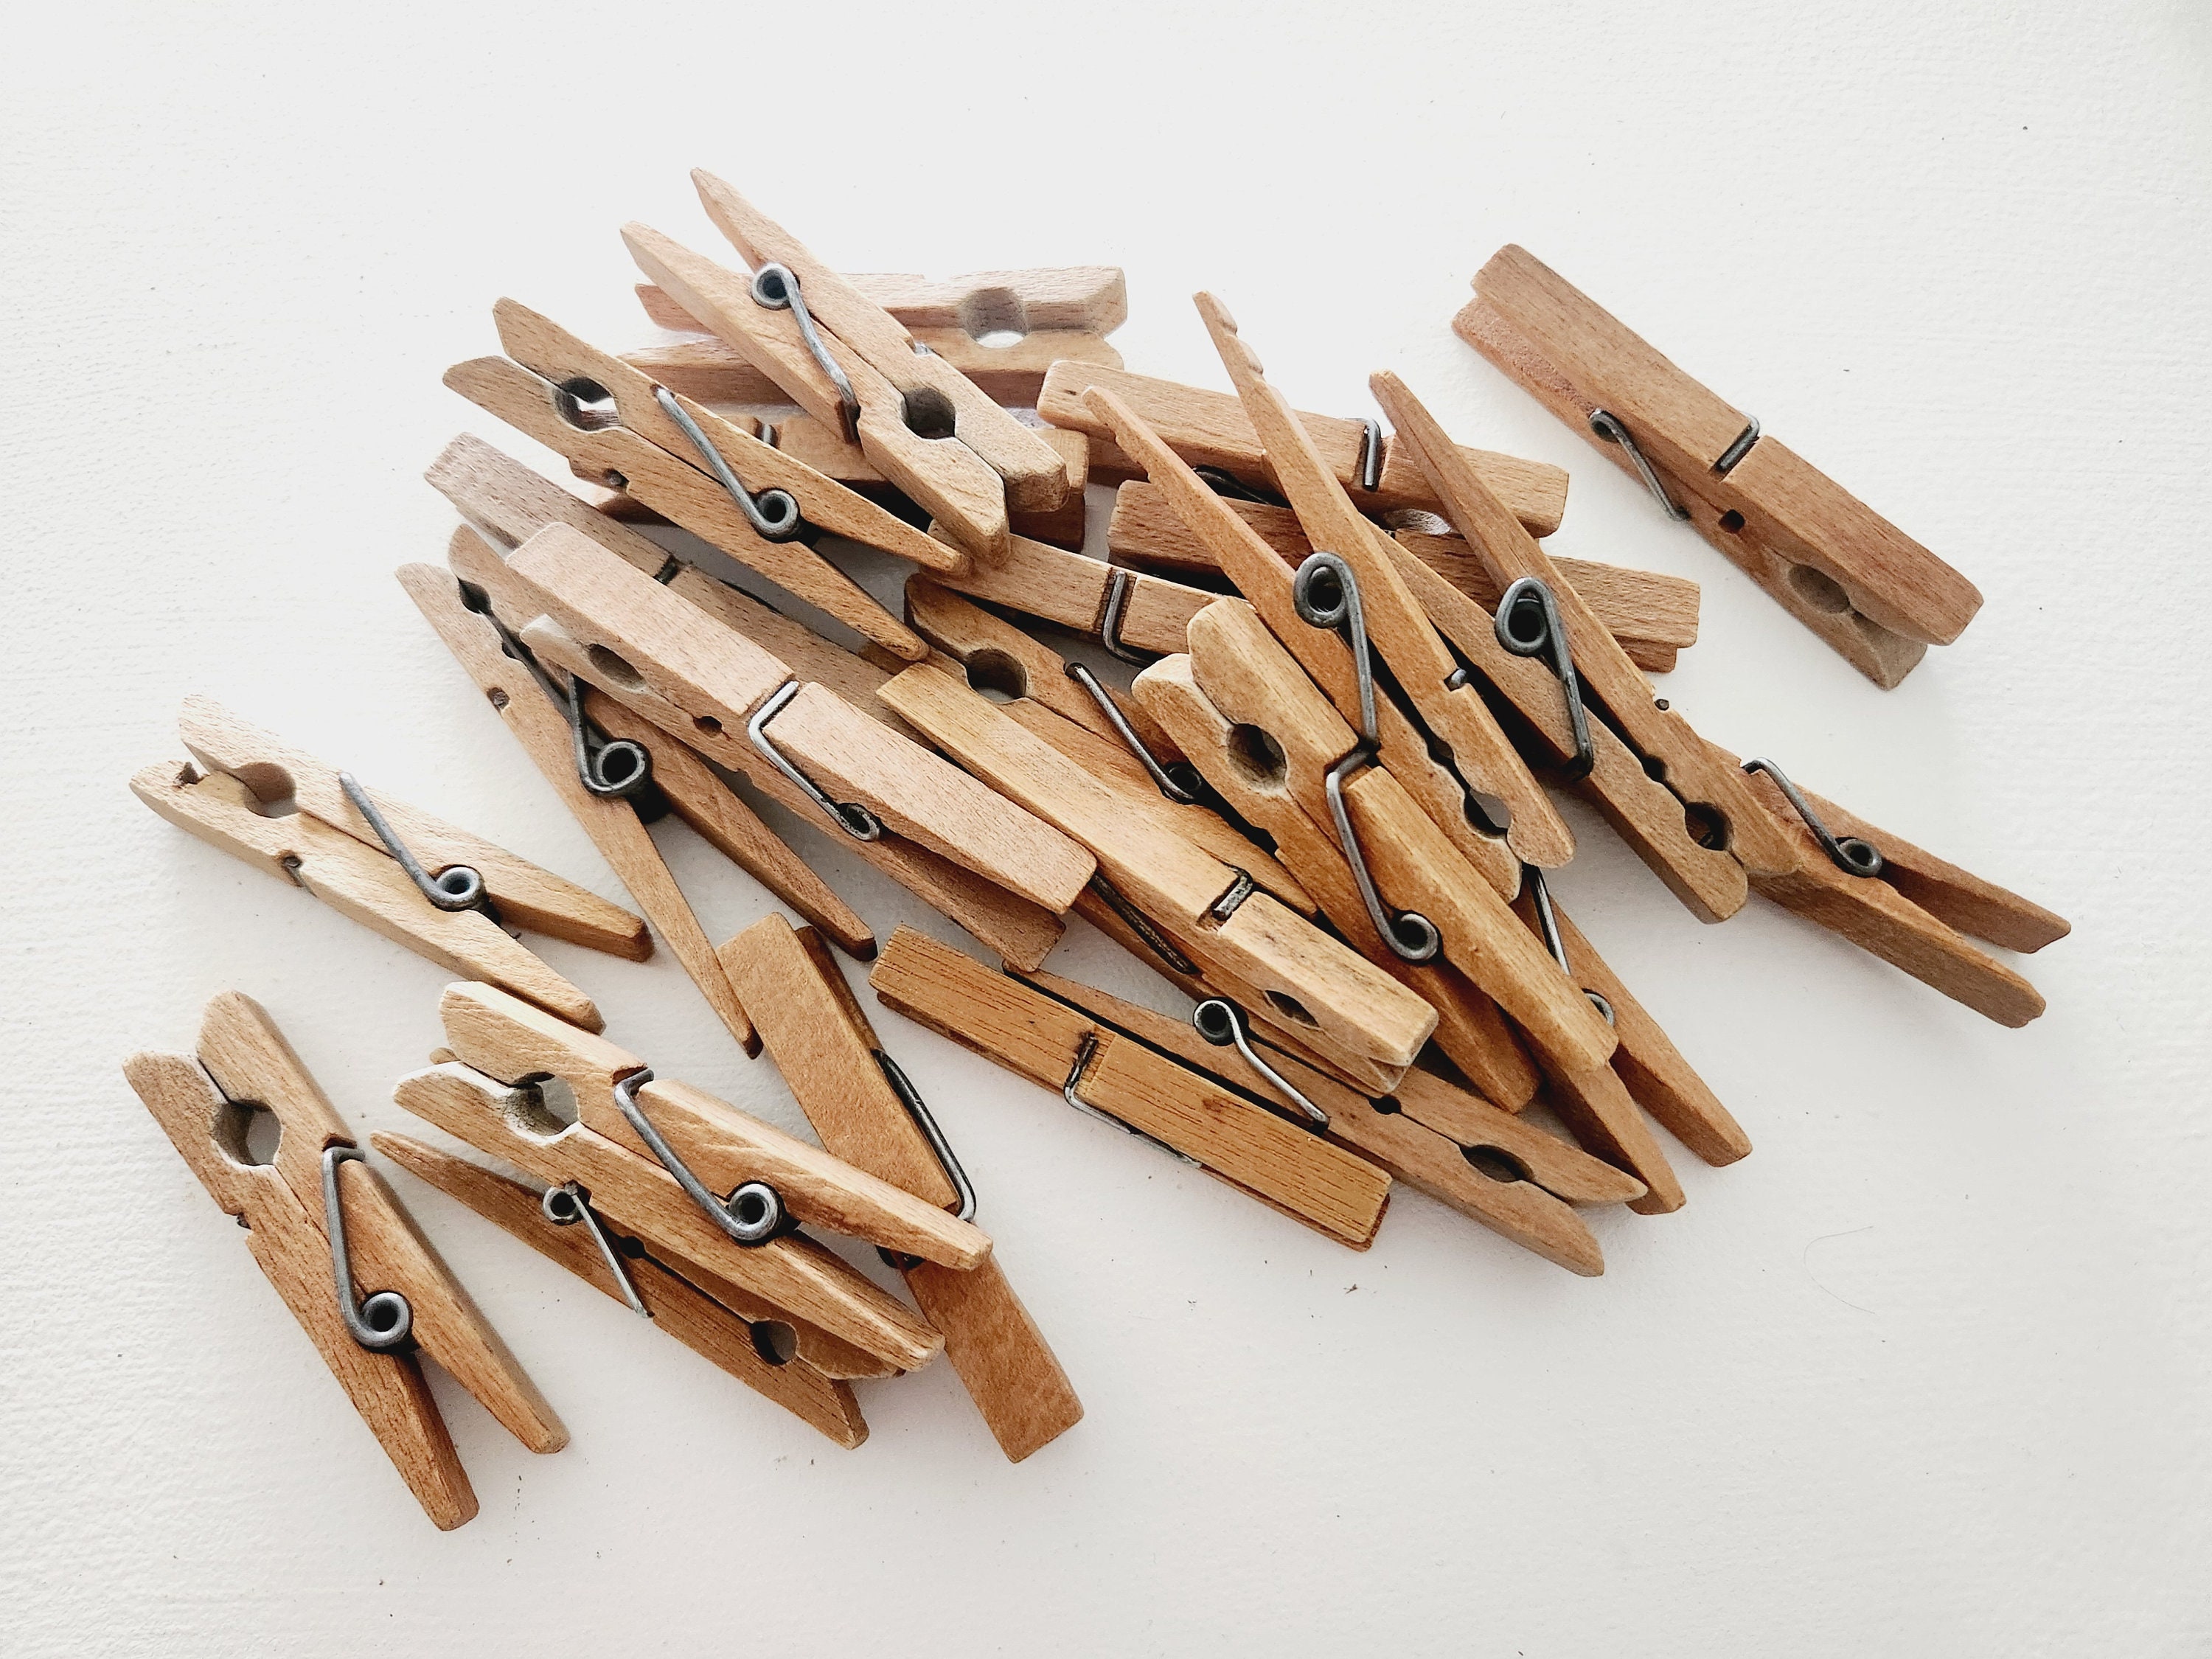 Vintage Wooden Spring Loaded Clothes Pins. Lot of 25 Mid-century Laundry  Pins, Uncycle Crafts, Clothes Pin Ideas, Laundry Room Decor. 